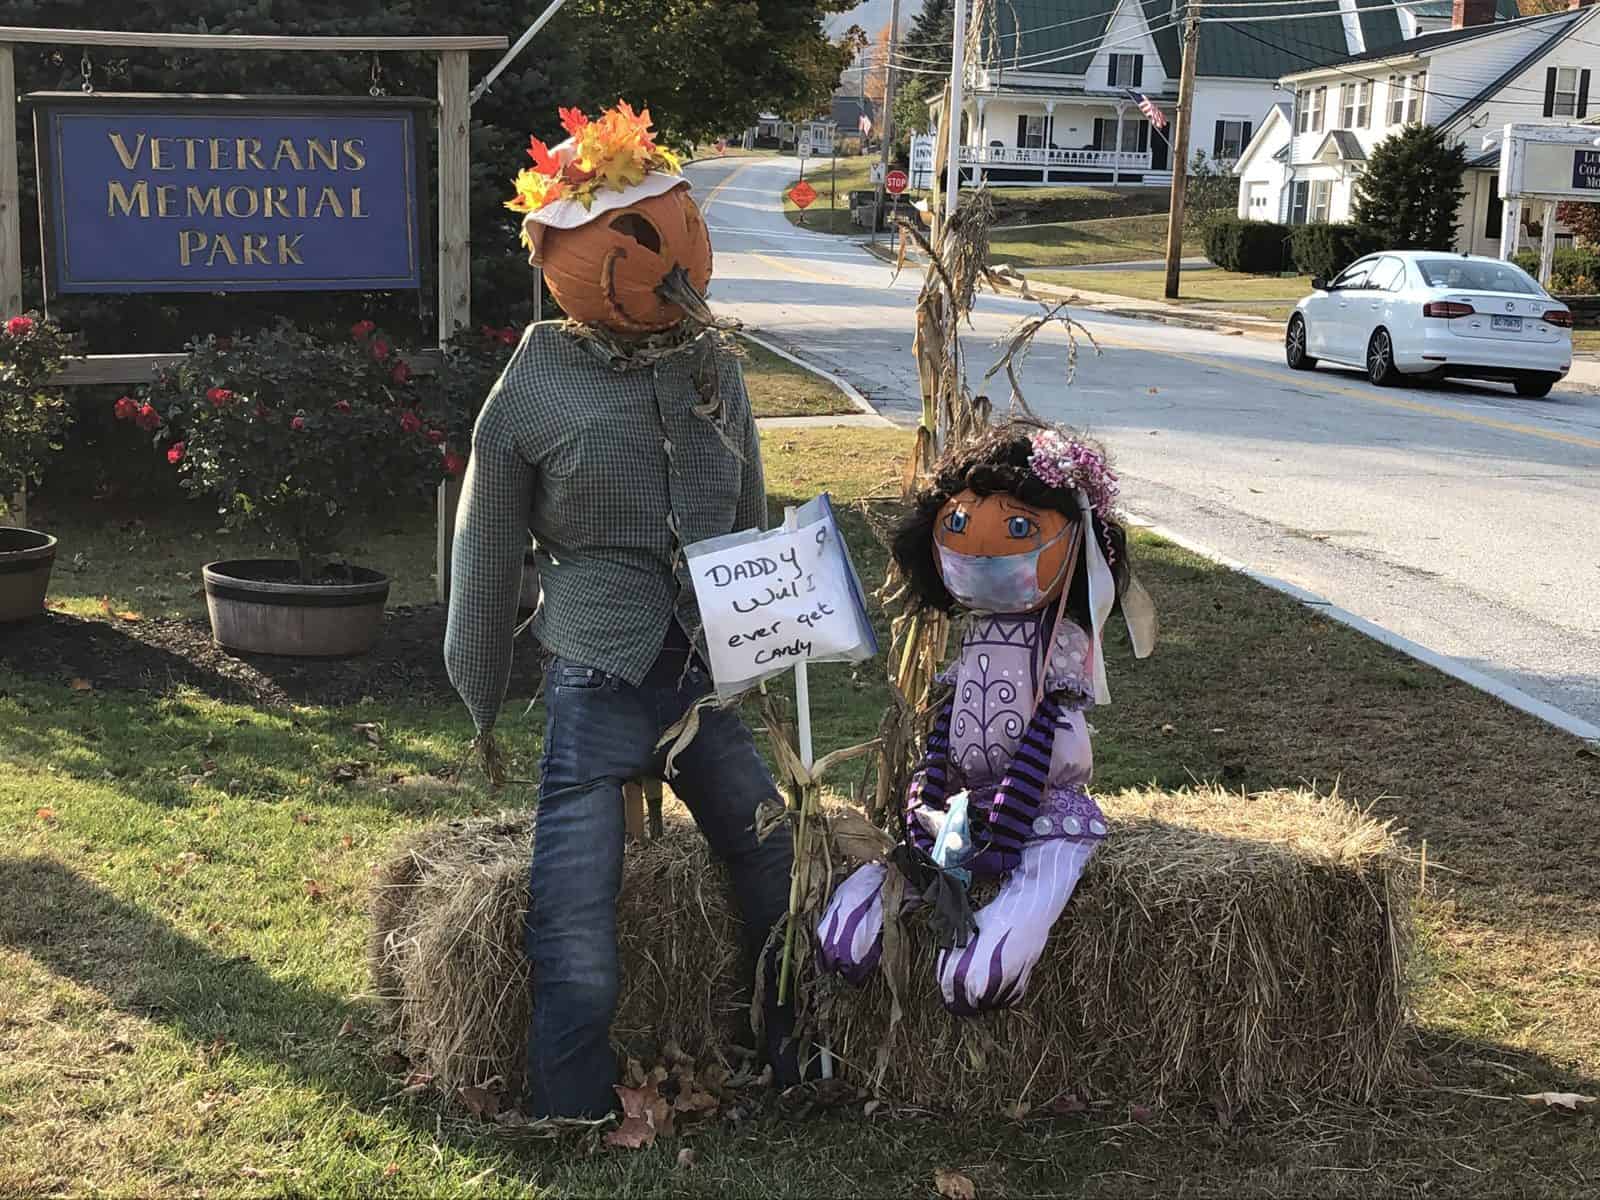  Ludlow Rec Dept. invited business and families to decorate downtown with creative scarecrows